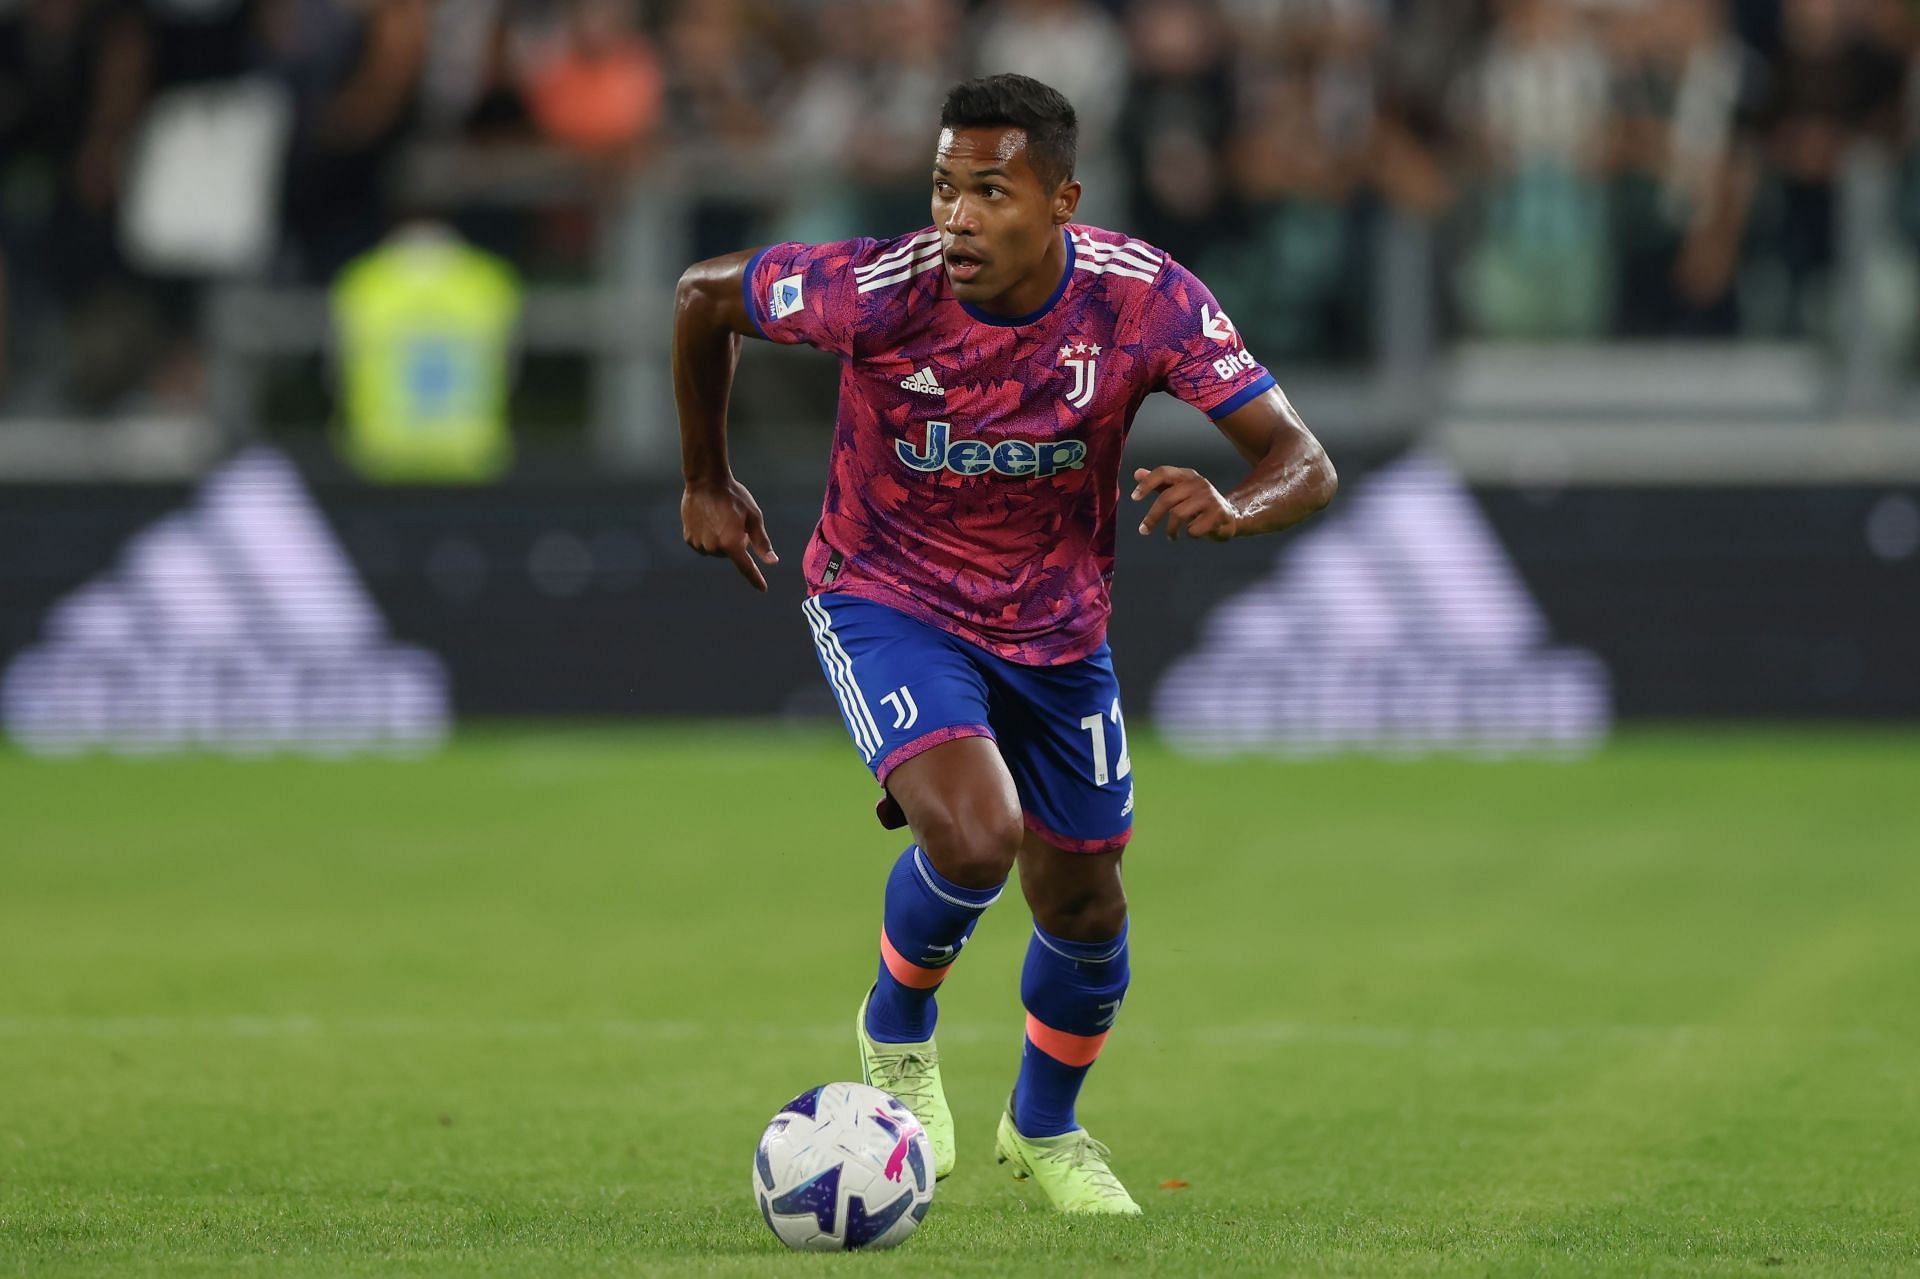 Alex Sandro is set to leave Juventus this summer.